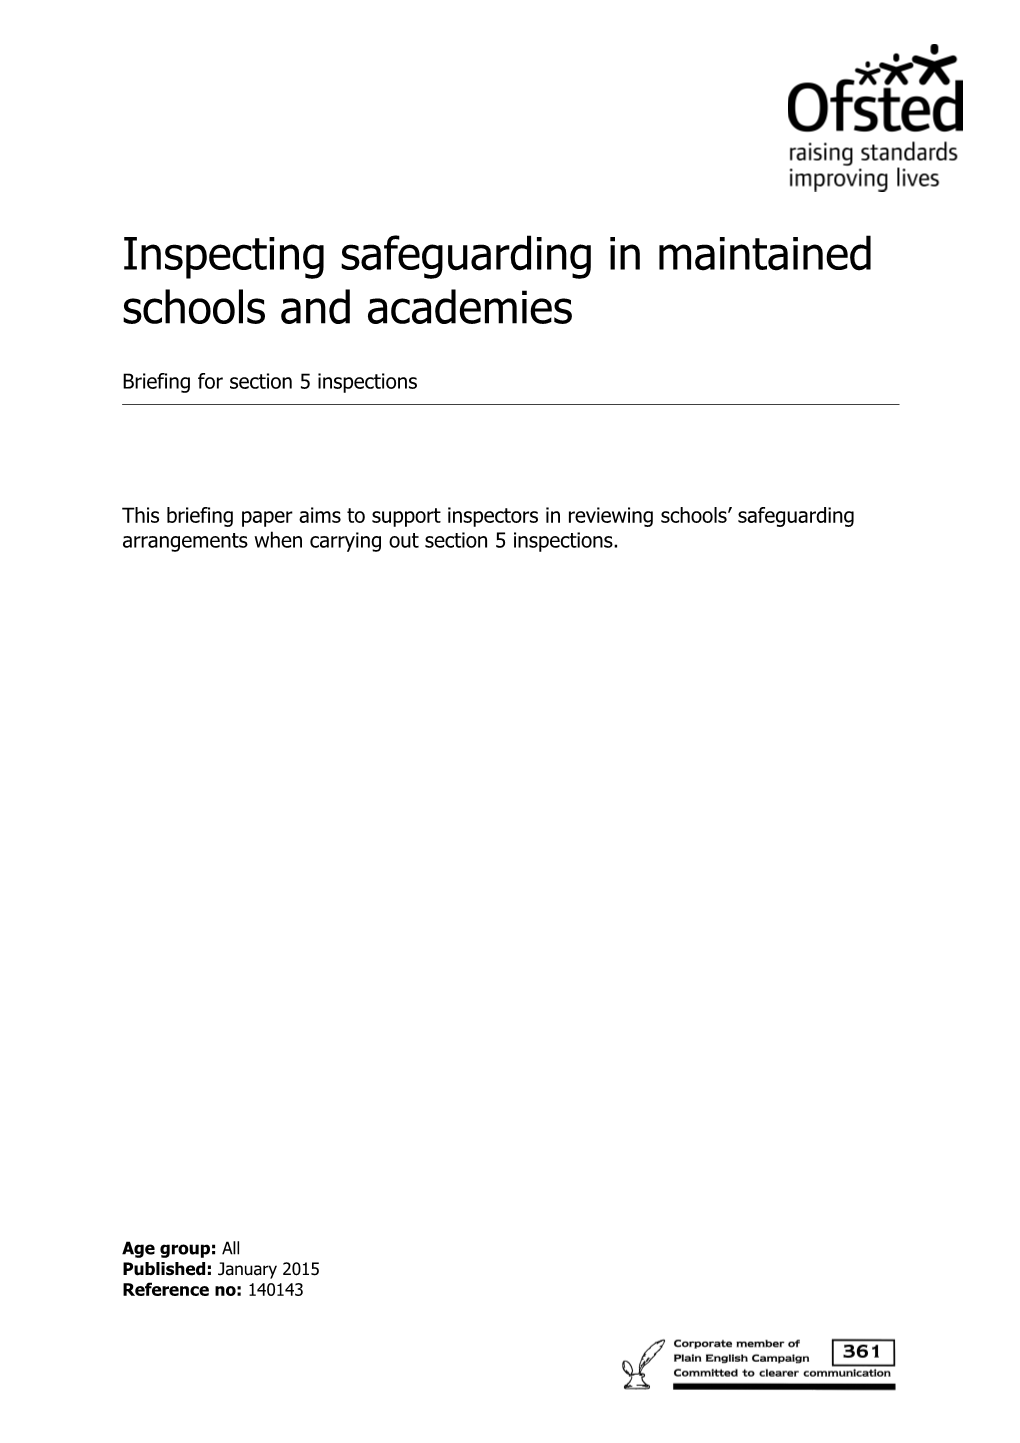 Inspecting Safeguarding in Maintained Schools and Academies - a Briefing for Section 5